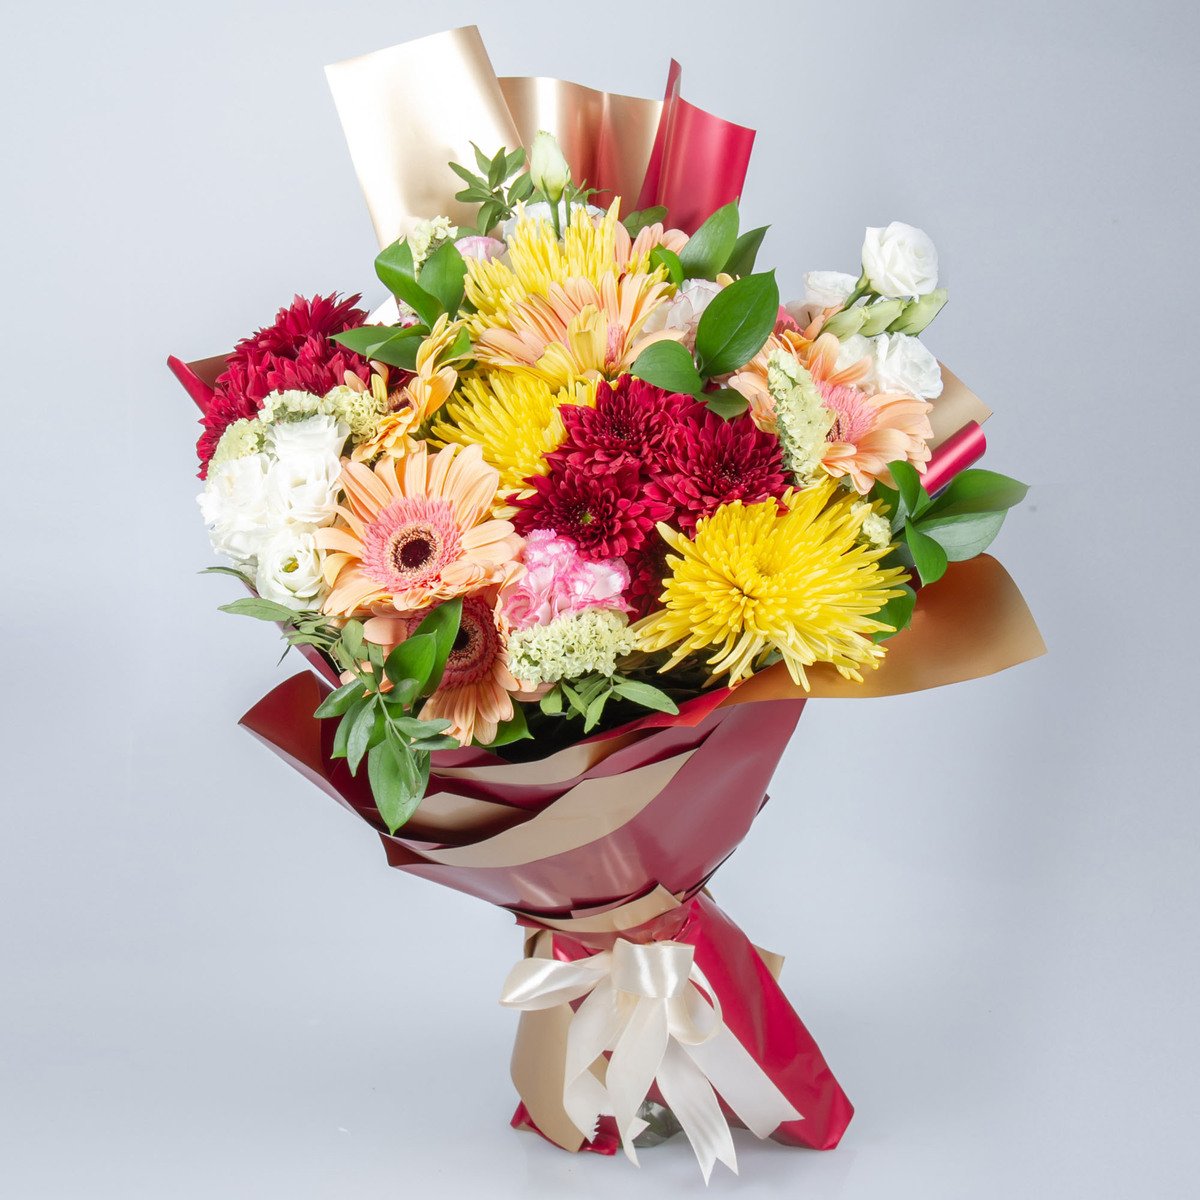 Mixed Flowers Hand Bouquet Of Germini, Delistar, Mums And Estomain Premium Packing